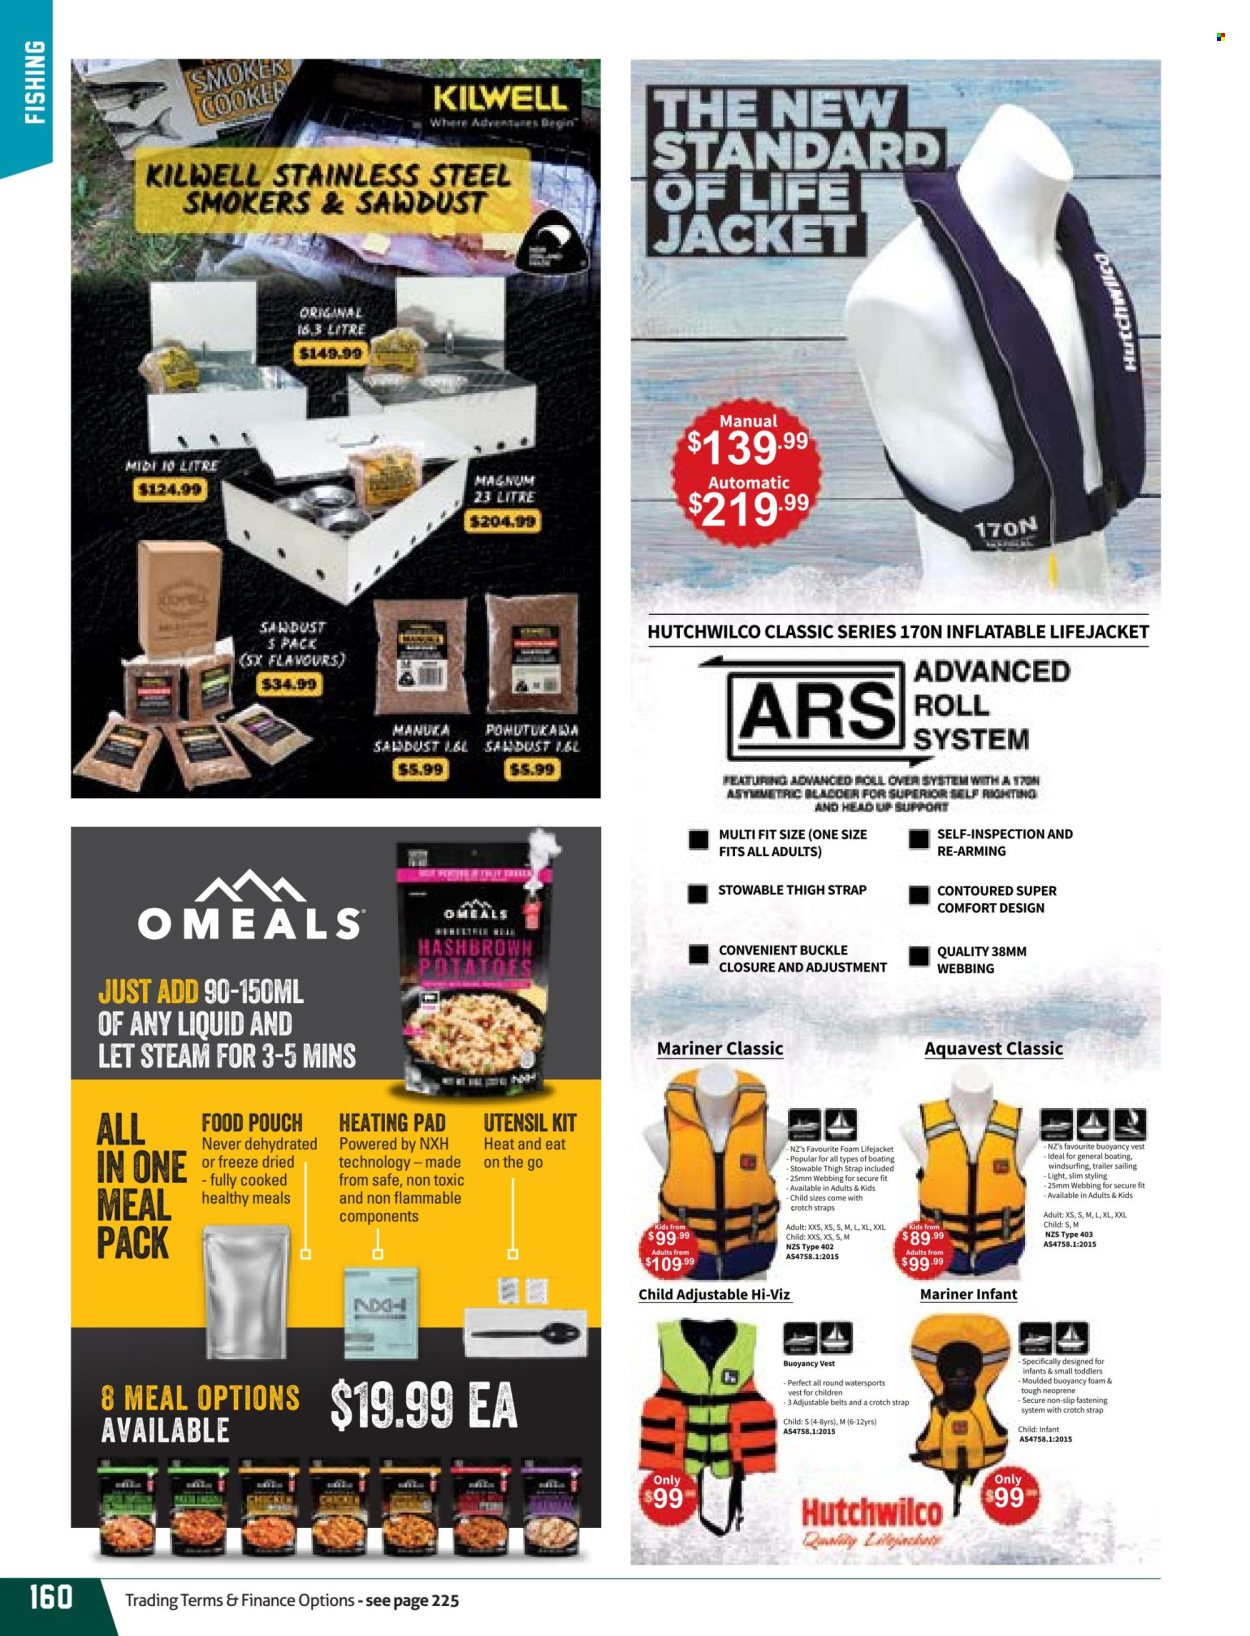 thumbnail - Hunting & Fishing mailer - Sales products - utensils, vest, life jacket, neoprene. Page 160.